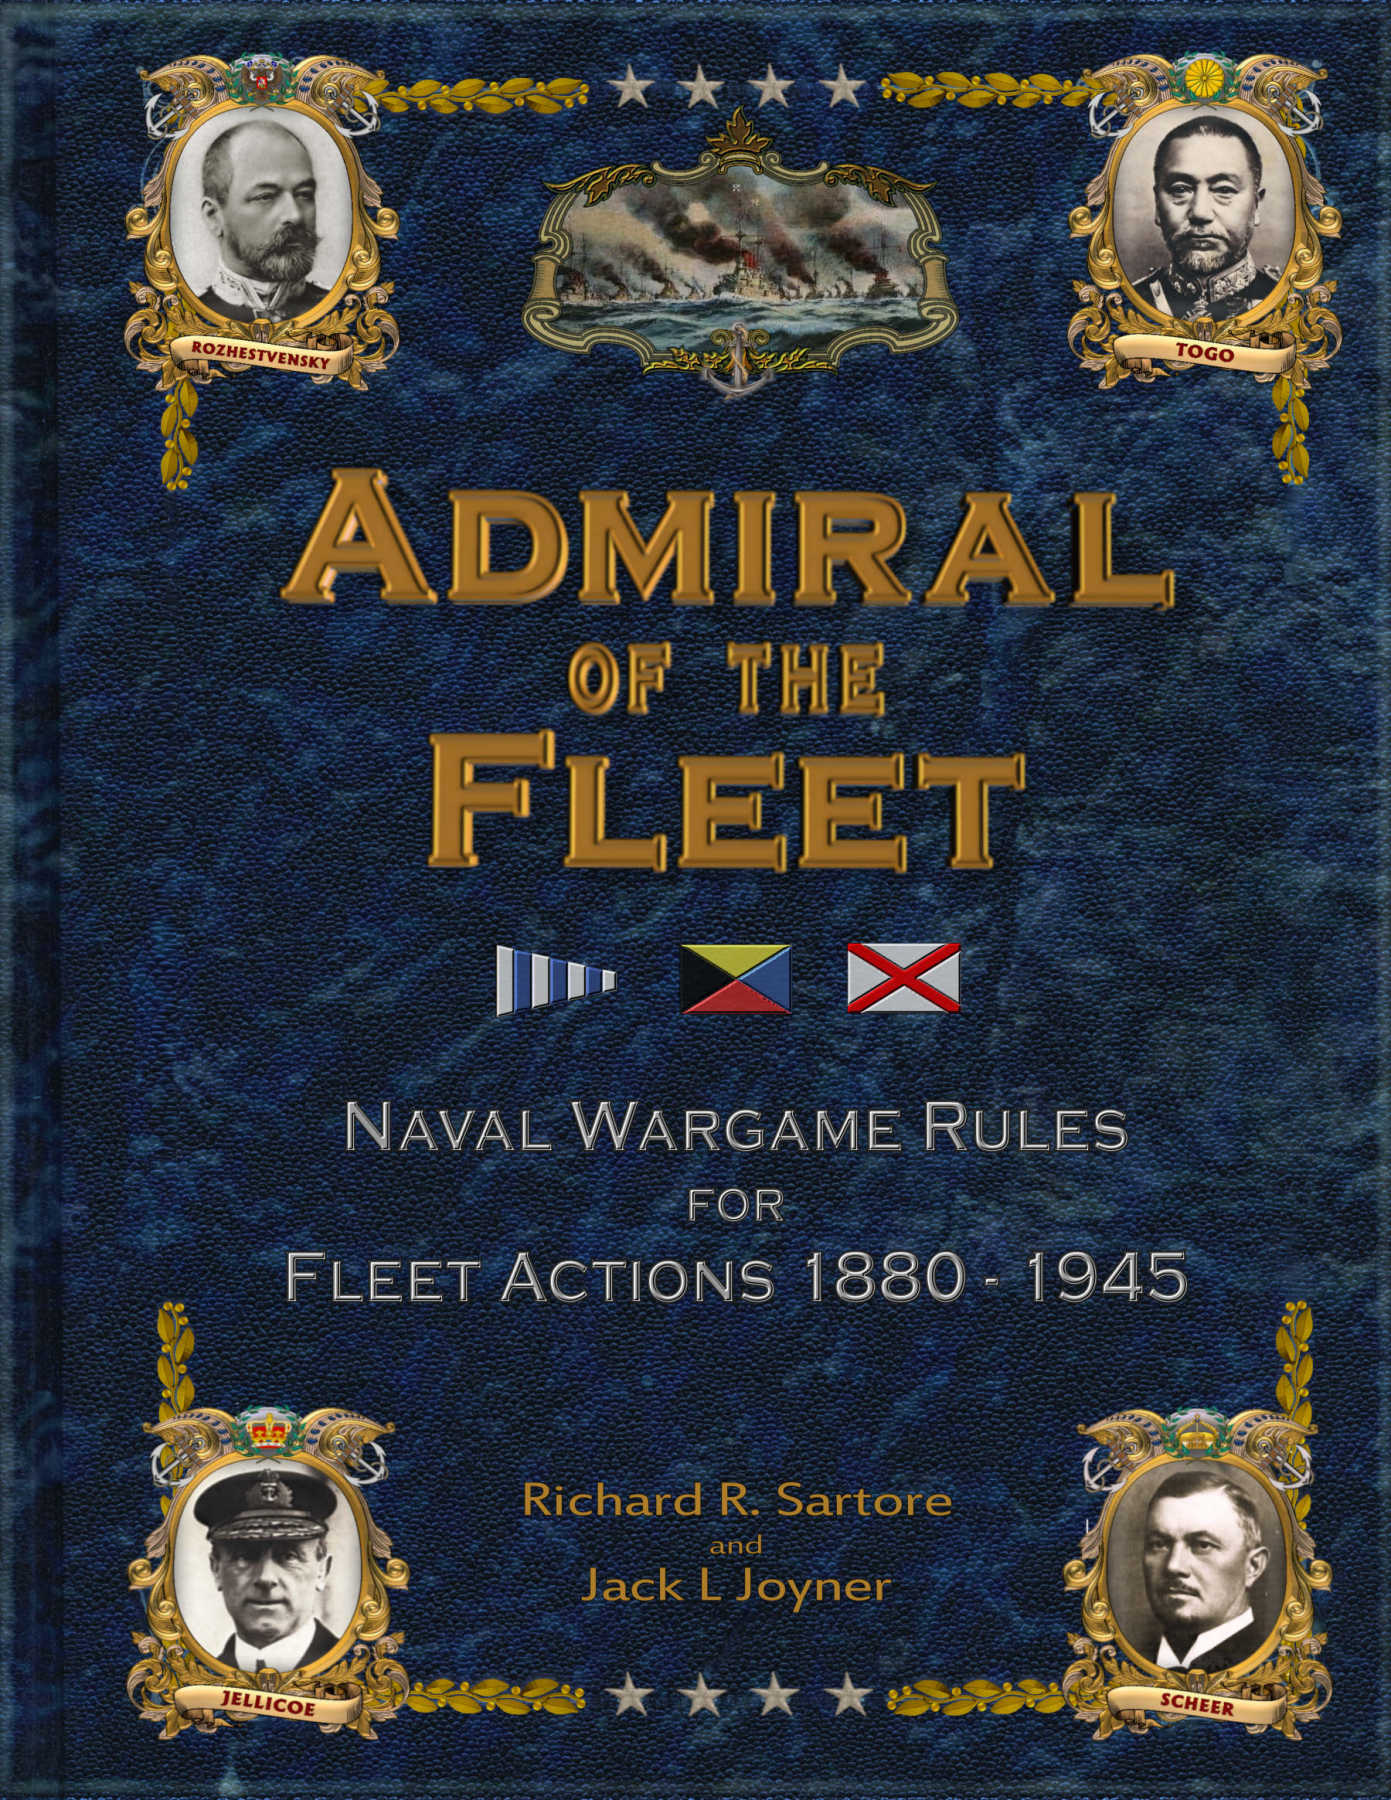 Admiral of the Fleet - Rules for fleet actions 1880-1945